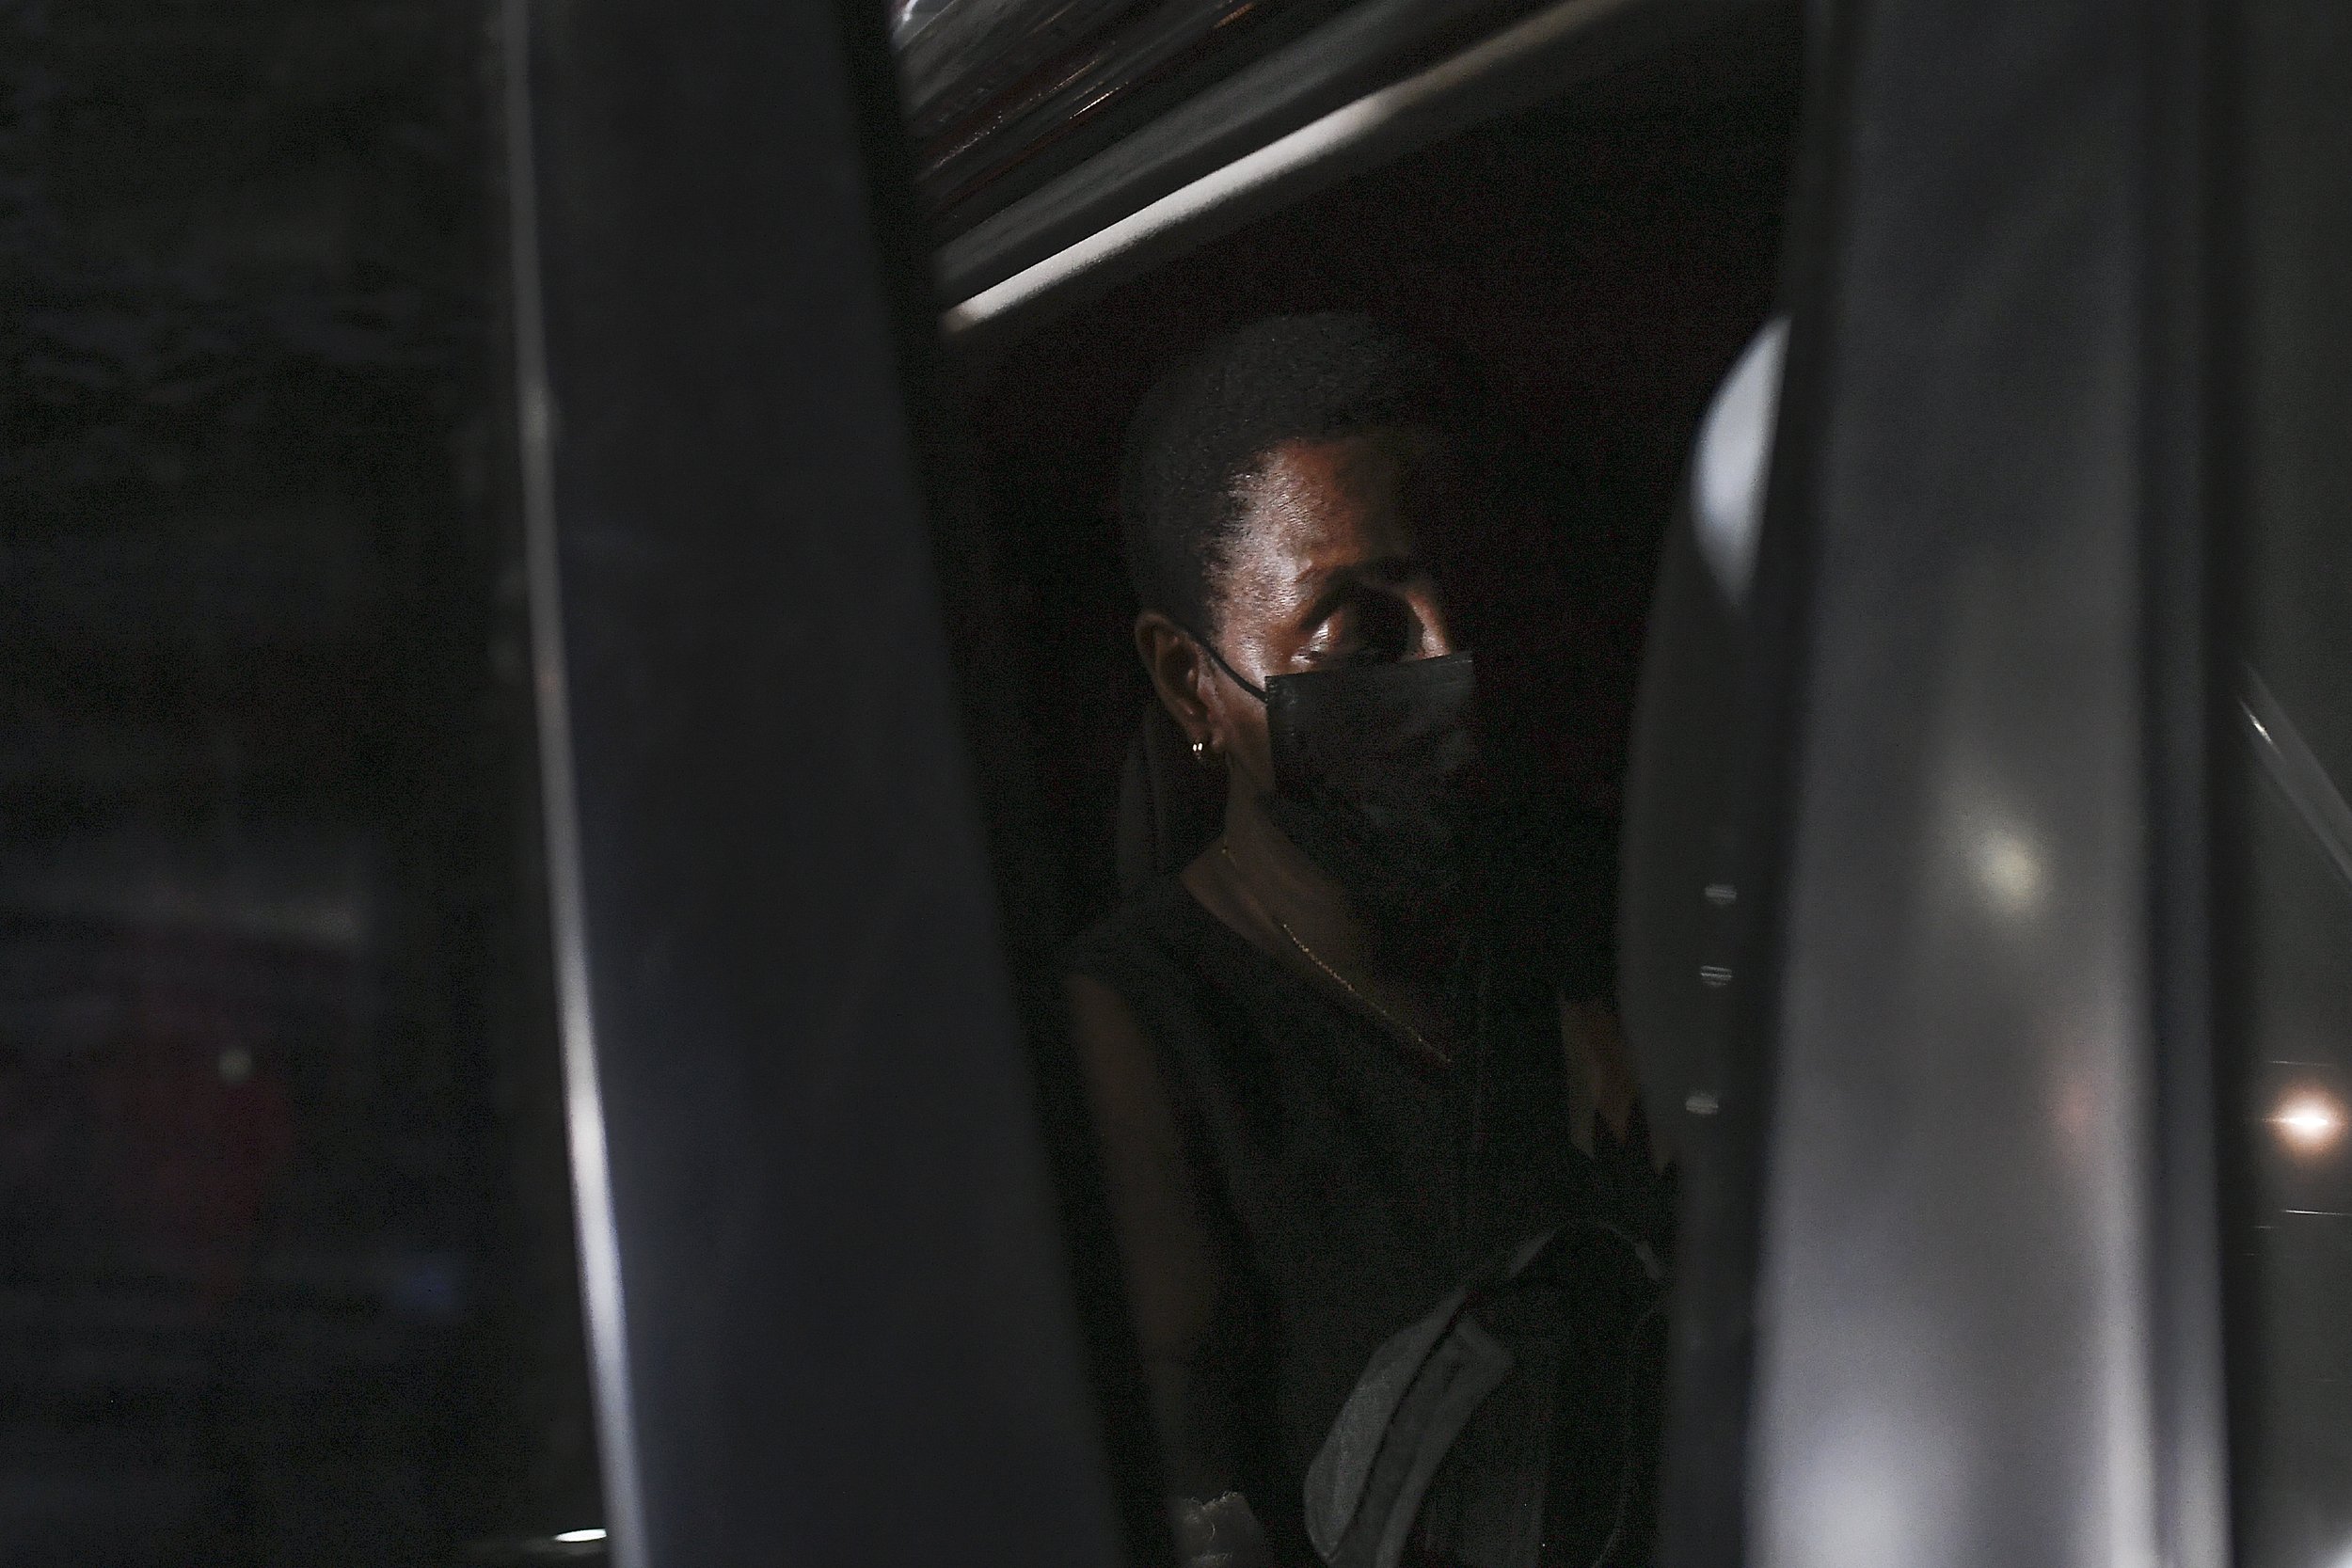  Martine Moise, the widow of Haitian President Jovenel Moise, sits in a car after a ceremony in remembrance of her husband at the Hotel Roi Christophe in Cap-Haitien, Haiti, on July 22, 2021. President Moise was assassinated at his home in Port-au-Pr